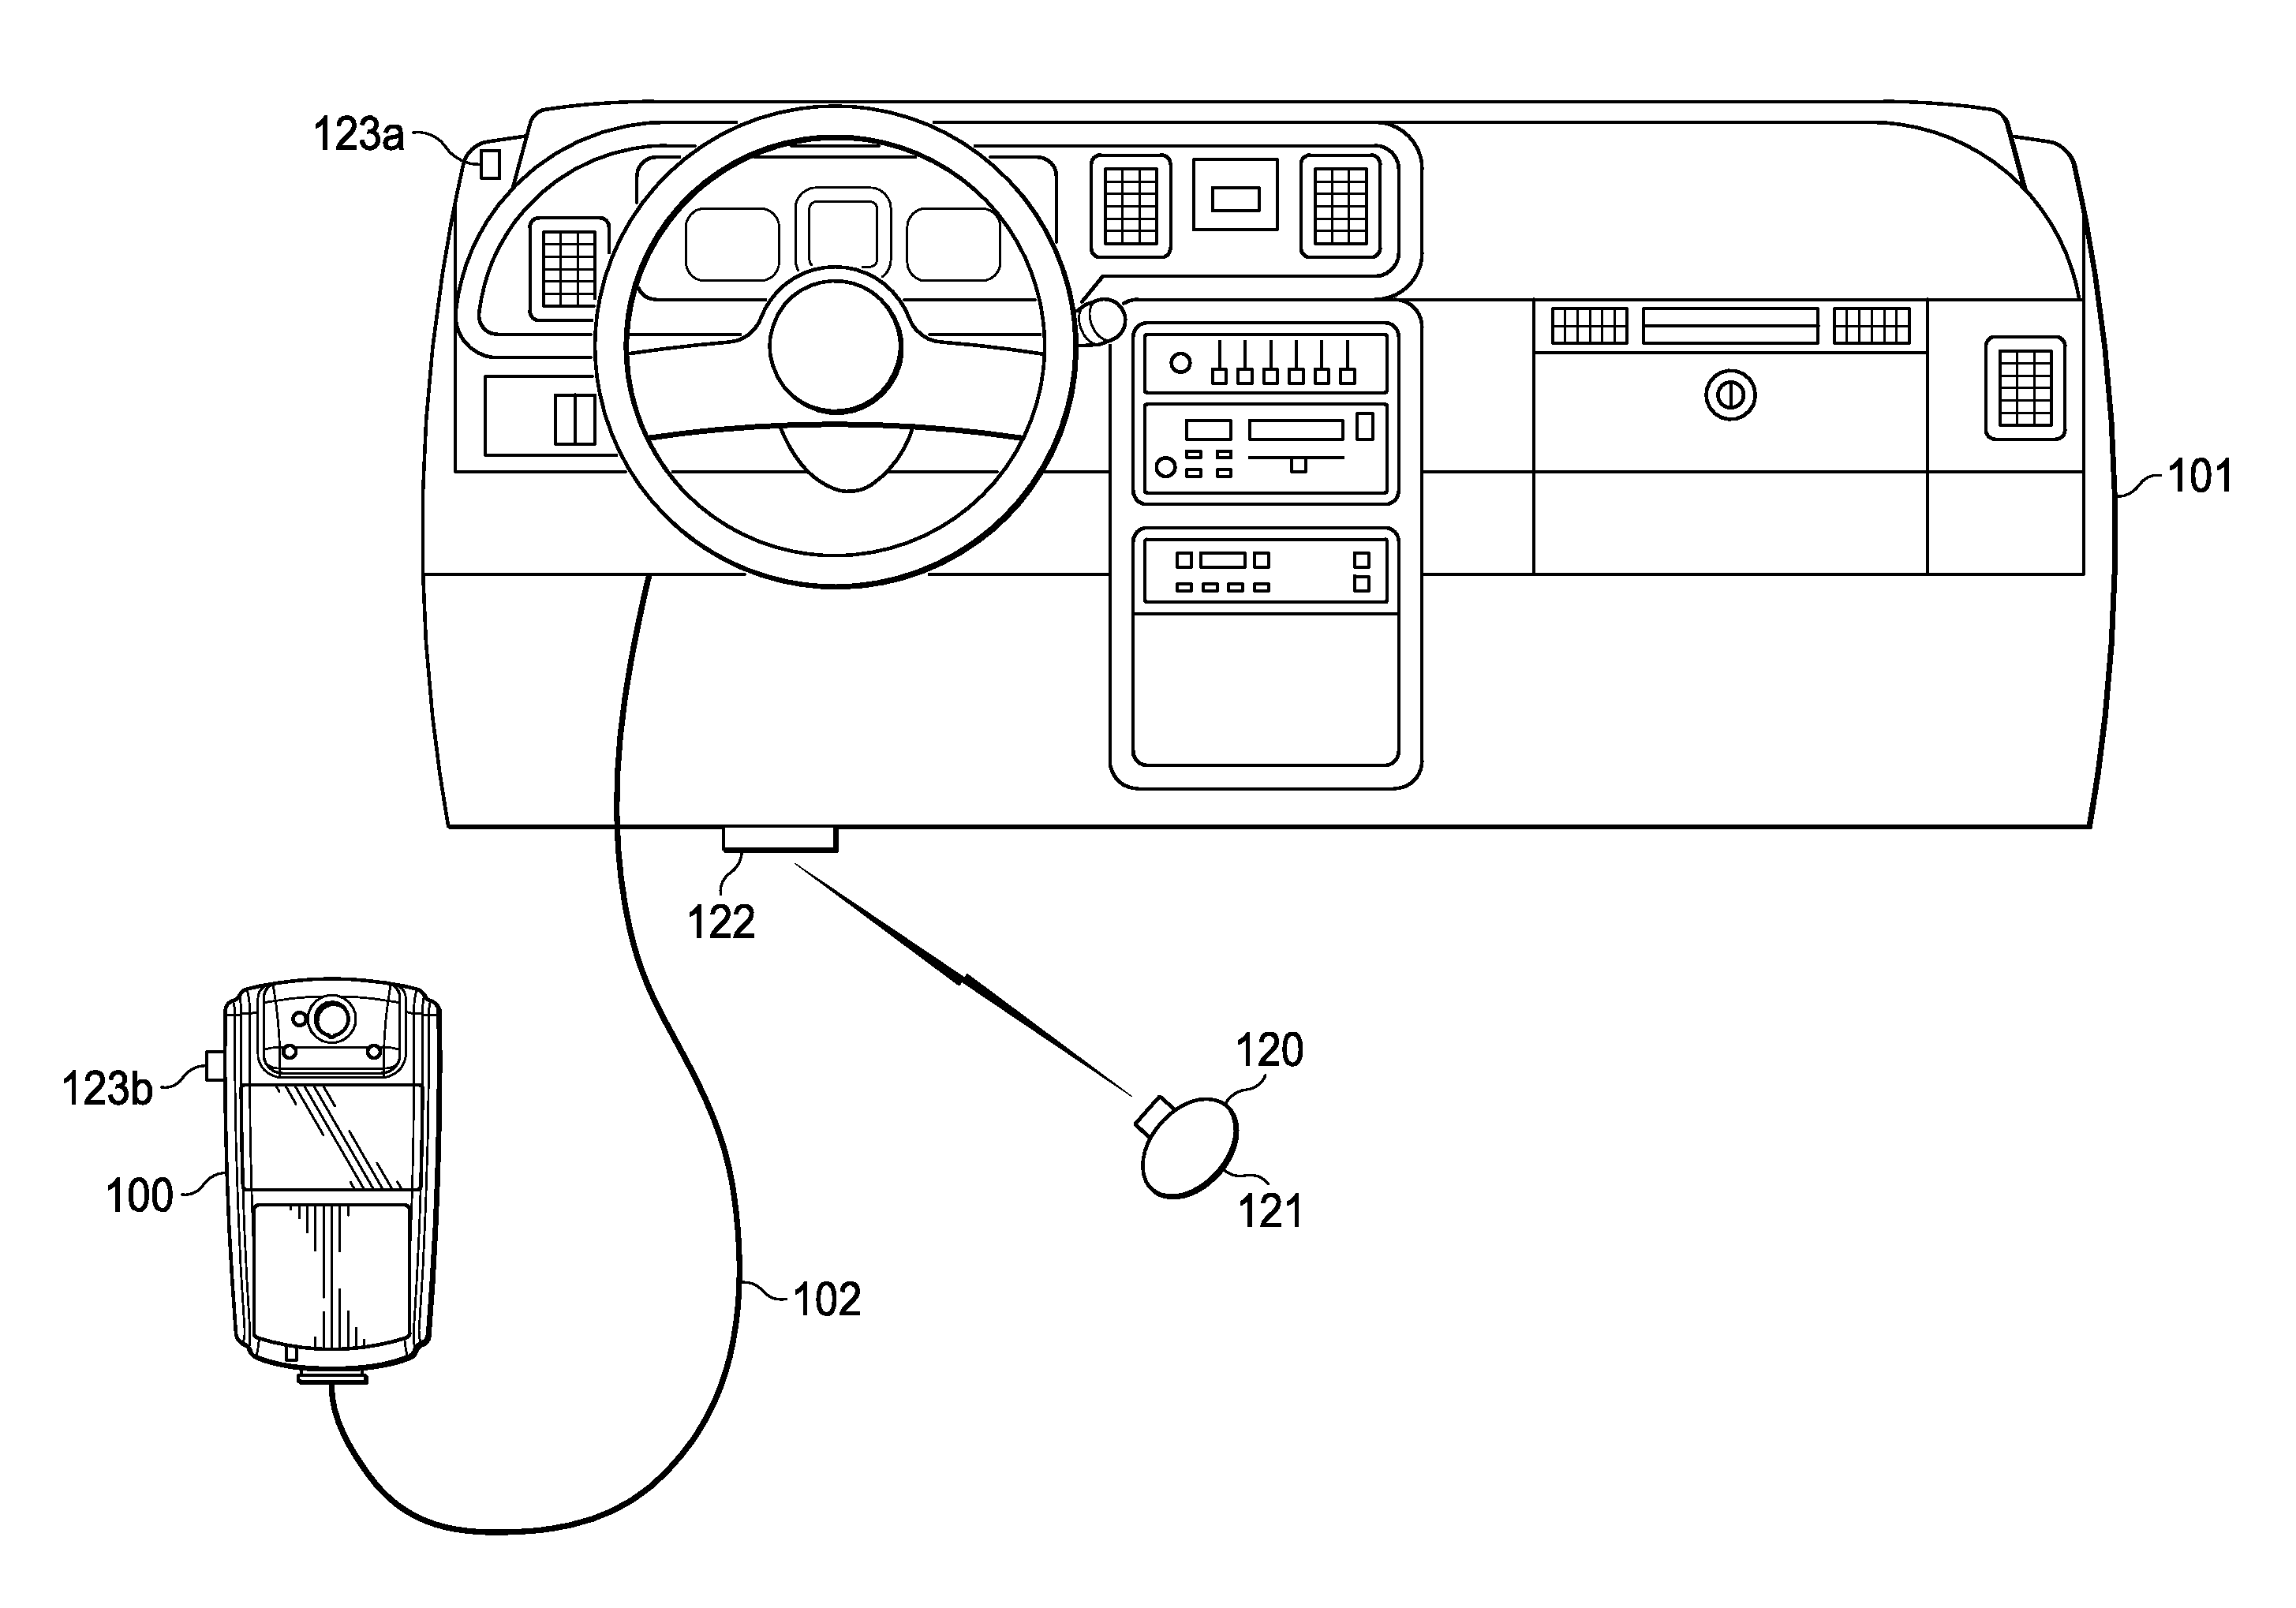 Systems and Methods for Monitoring Individuals for Substance Abuse